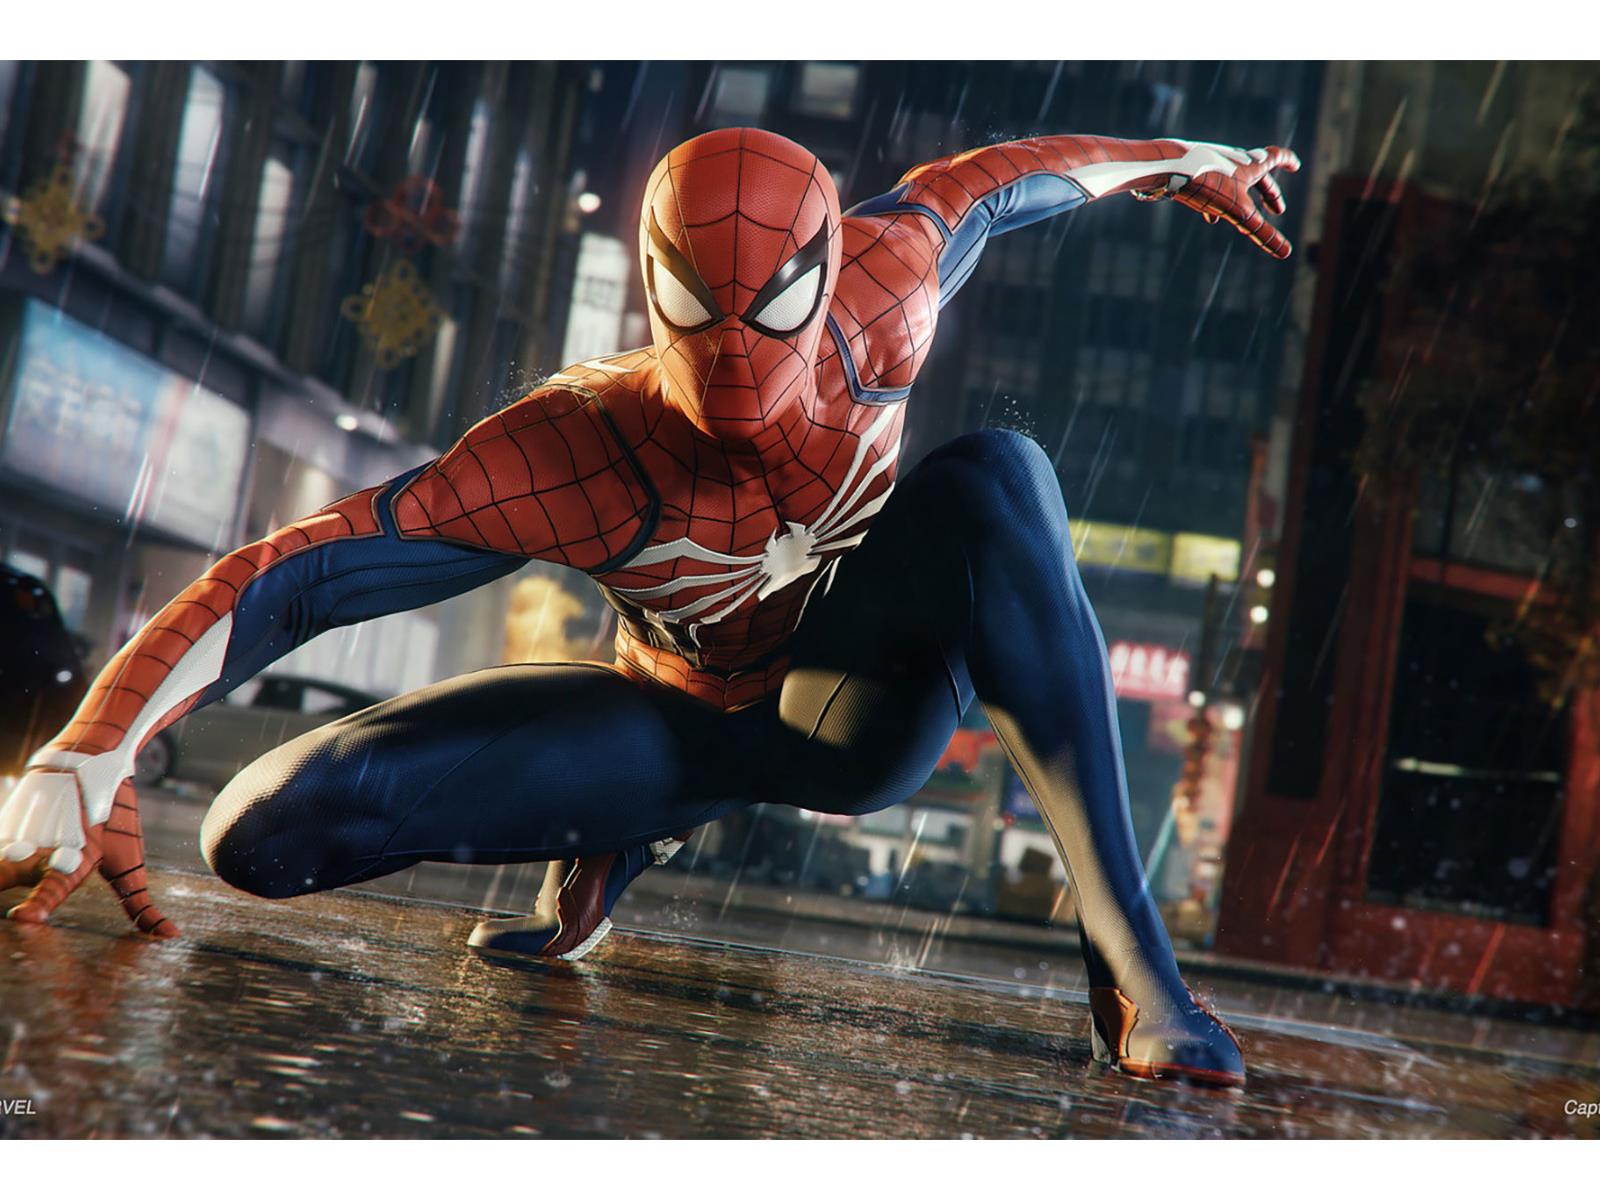 Marvel's Spider-Man Remastered PC specs detail DLSS and ray tracing